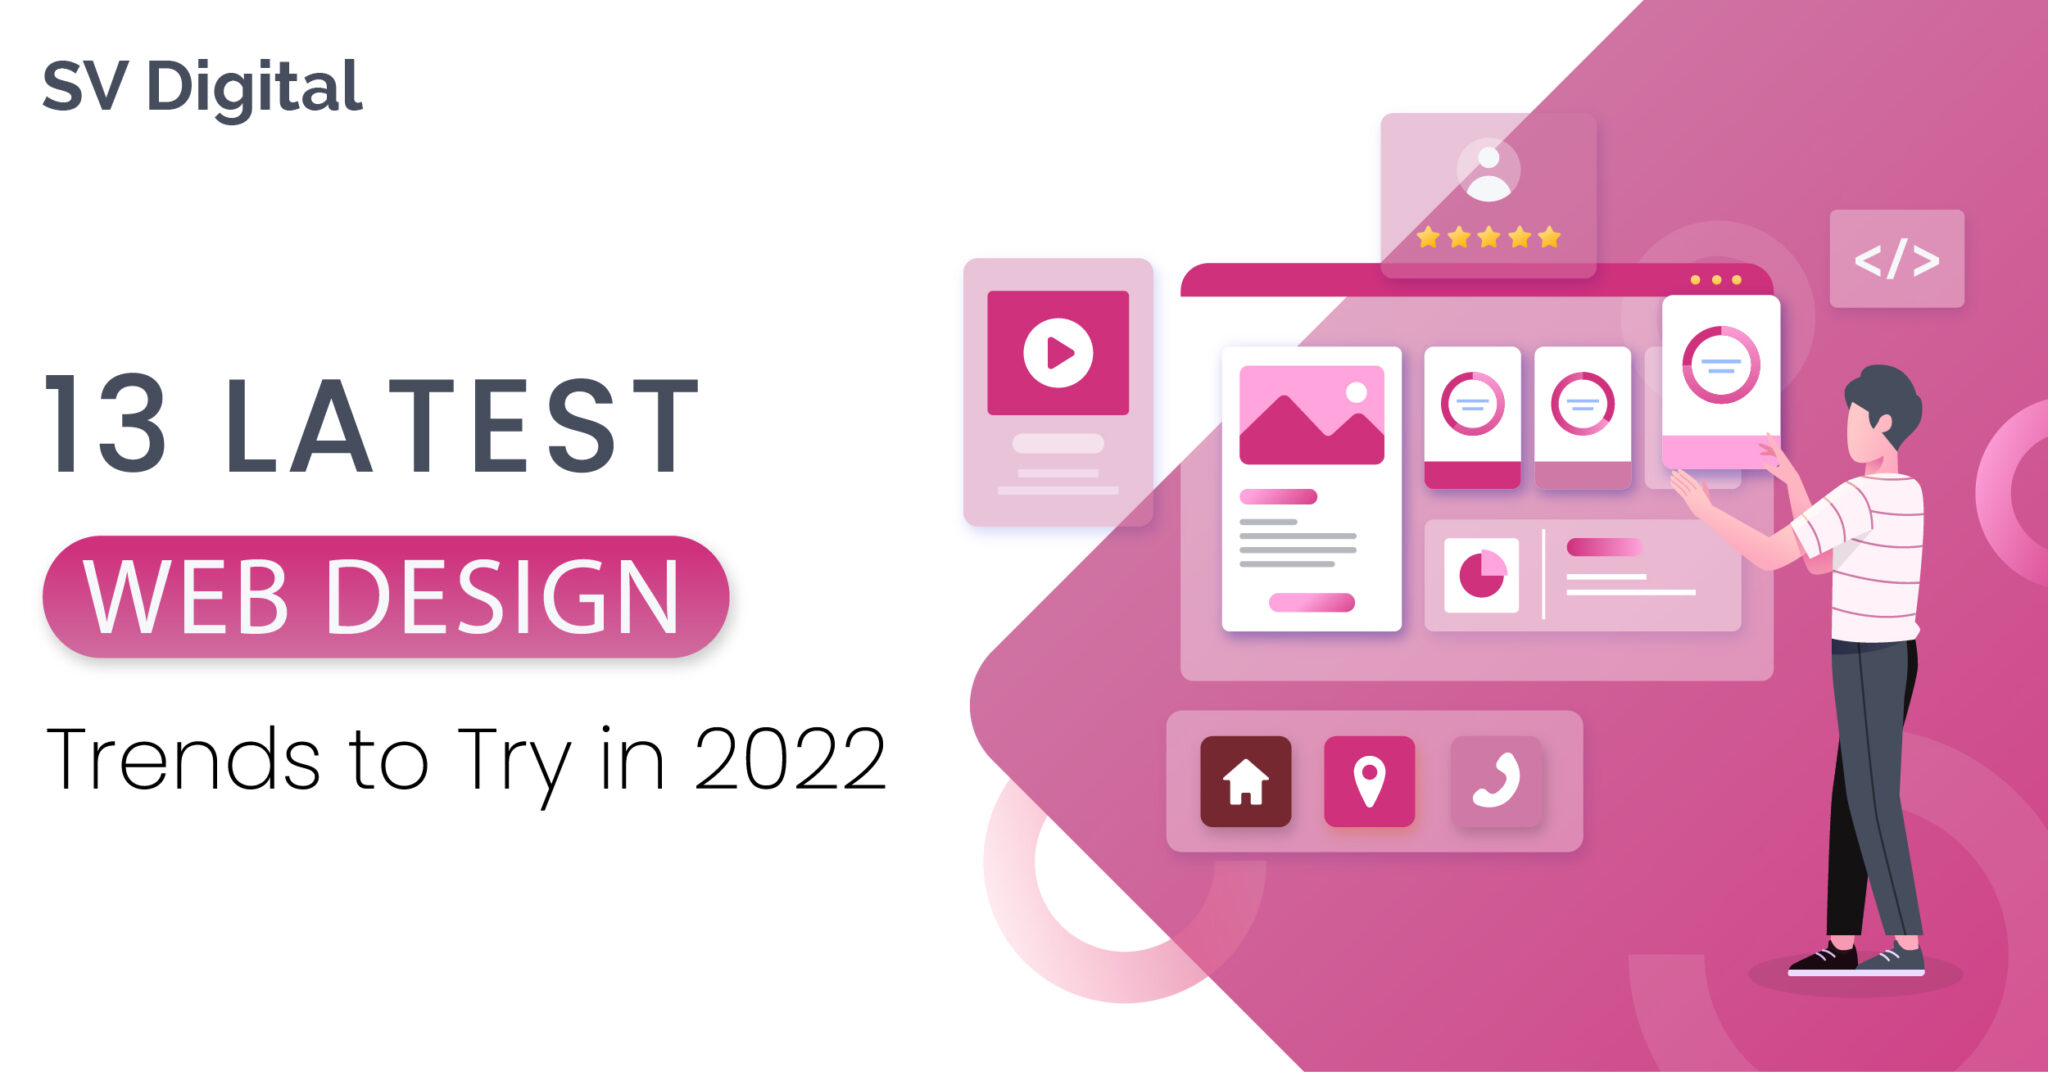 13 Latest Web Design Trends to Try in 2022